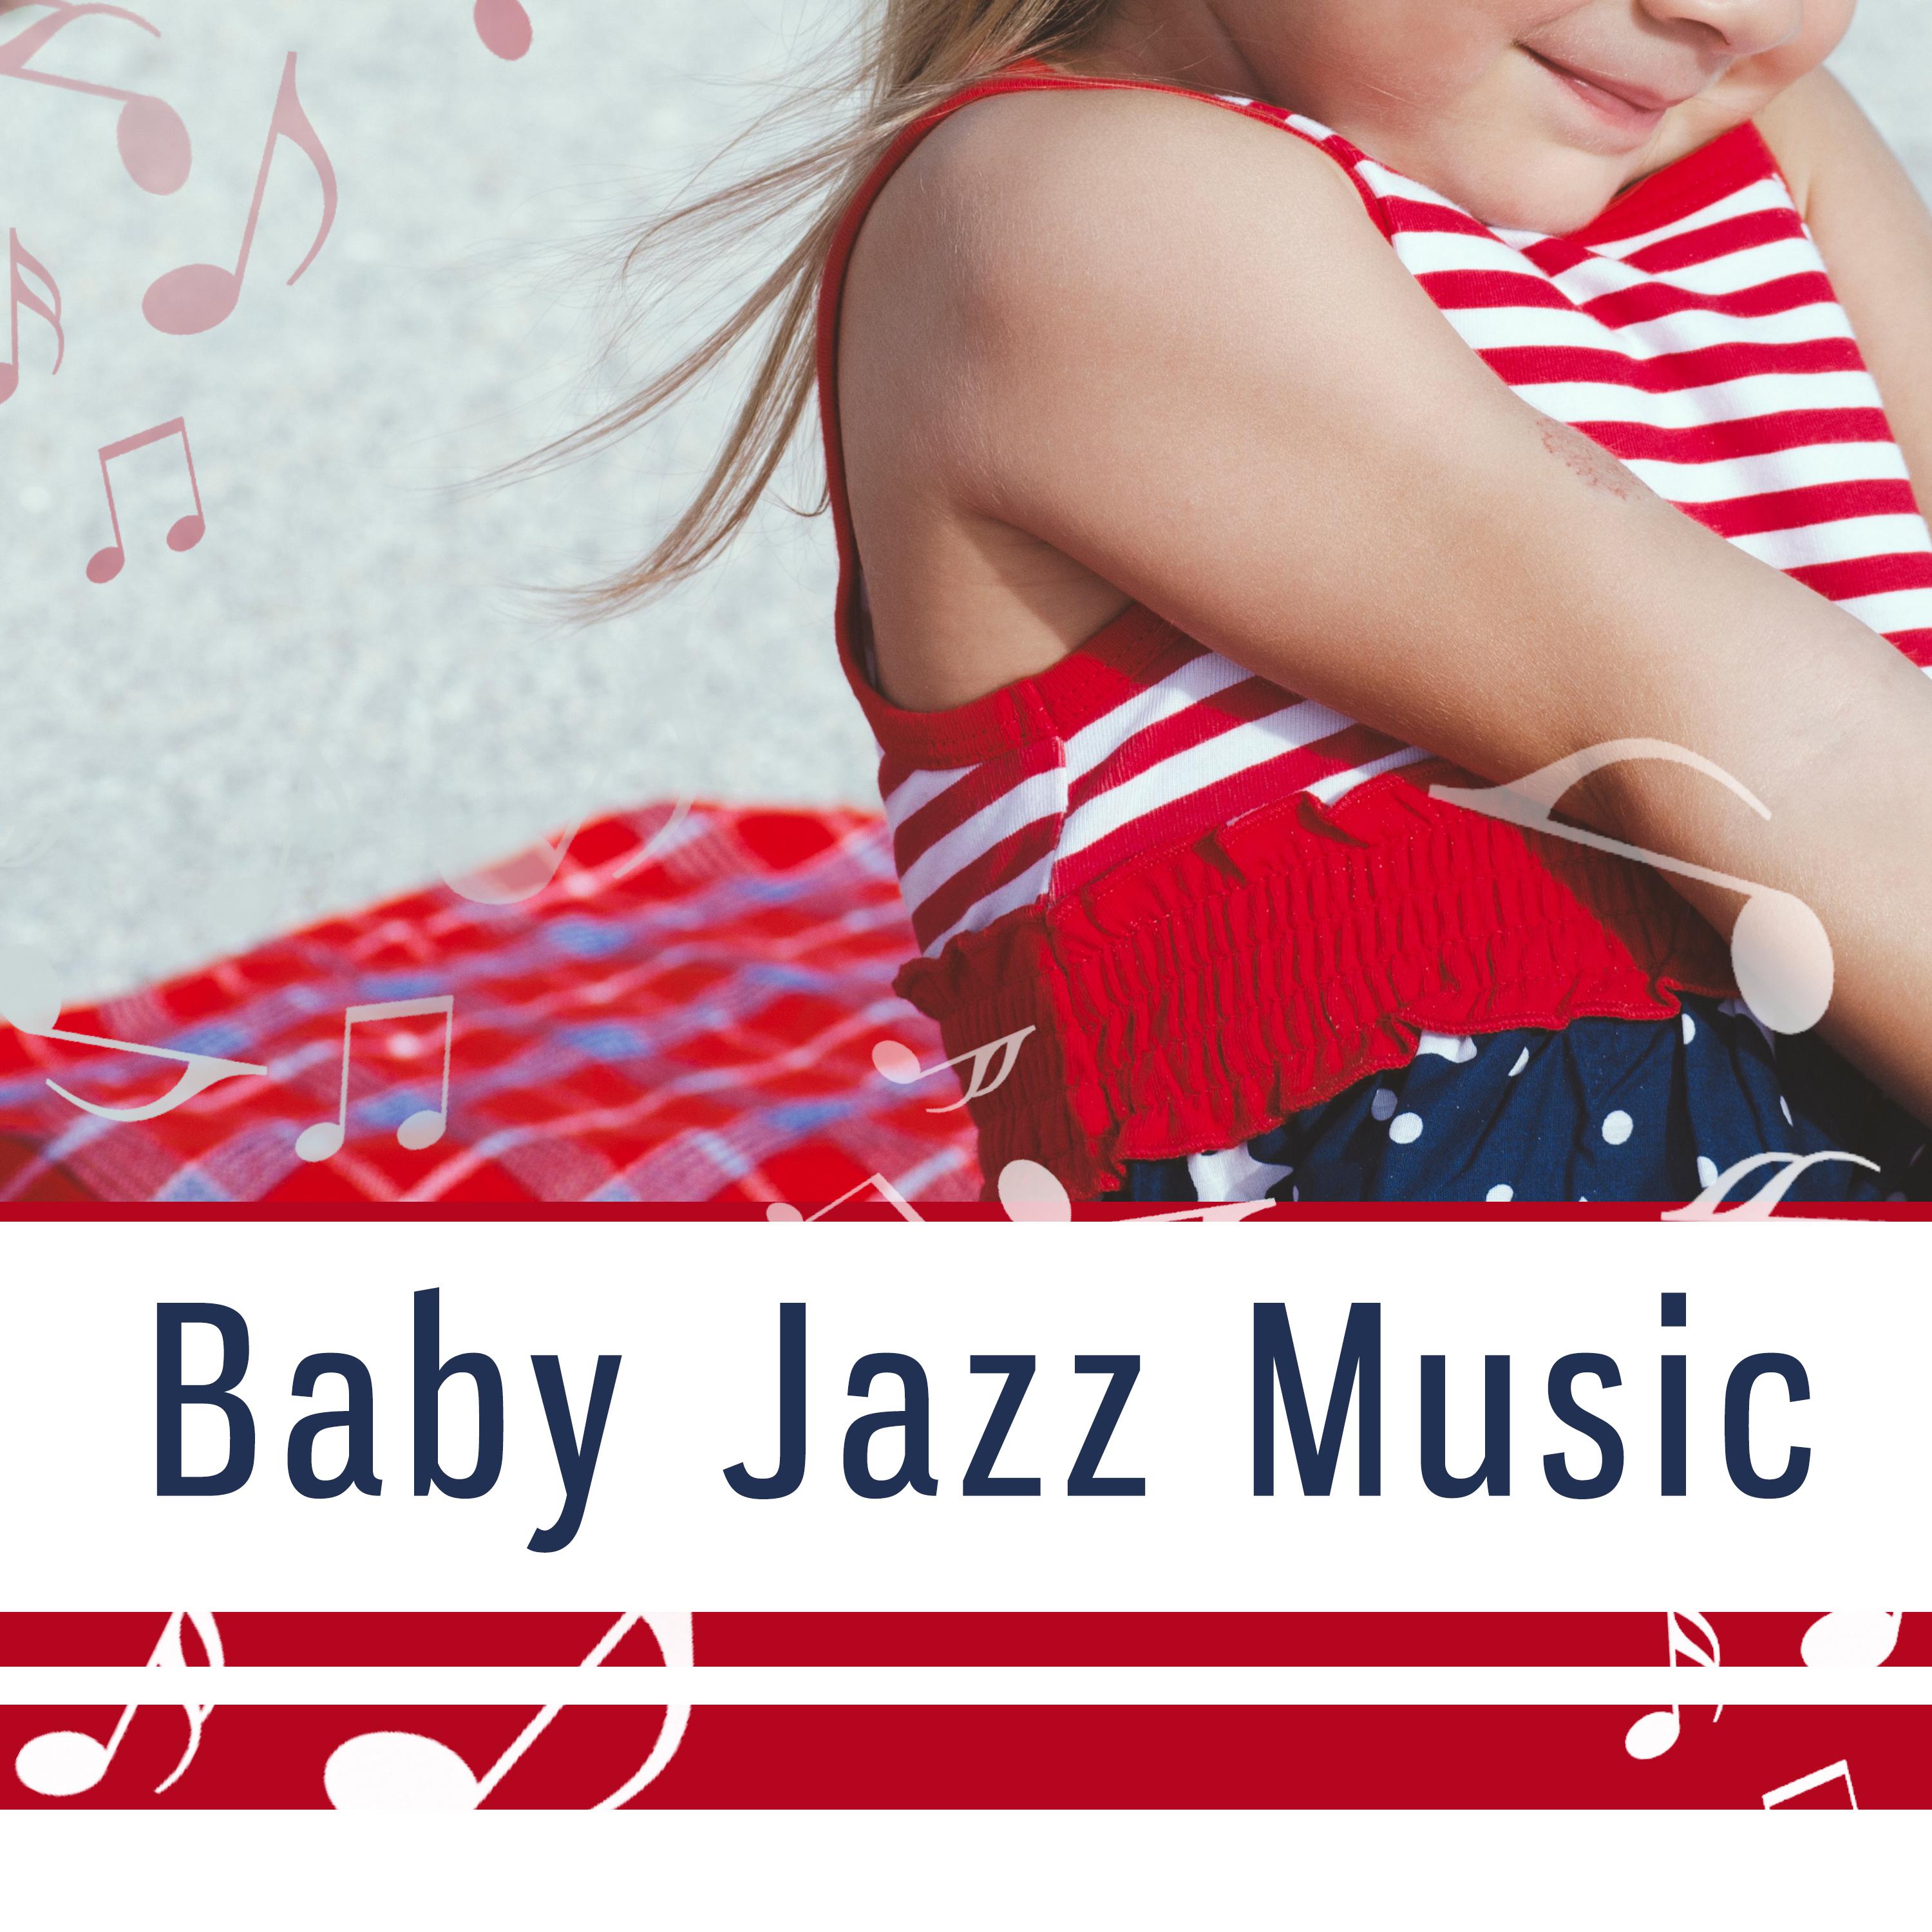 Baby Jazz Music – Instrumental Songs for Sleep, Quiet Baby, Piano Music for Baby, Deep Sleep, Soothing Jazz to Bed